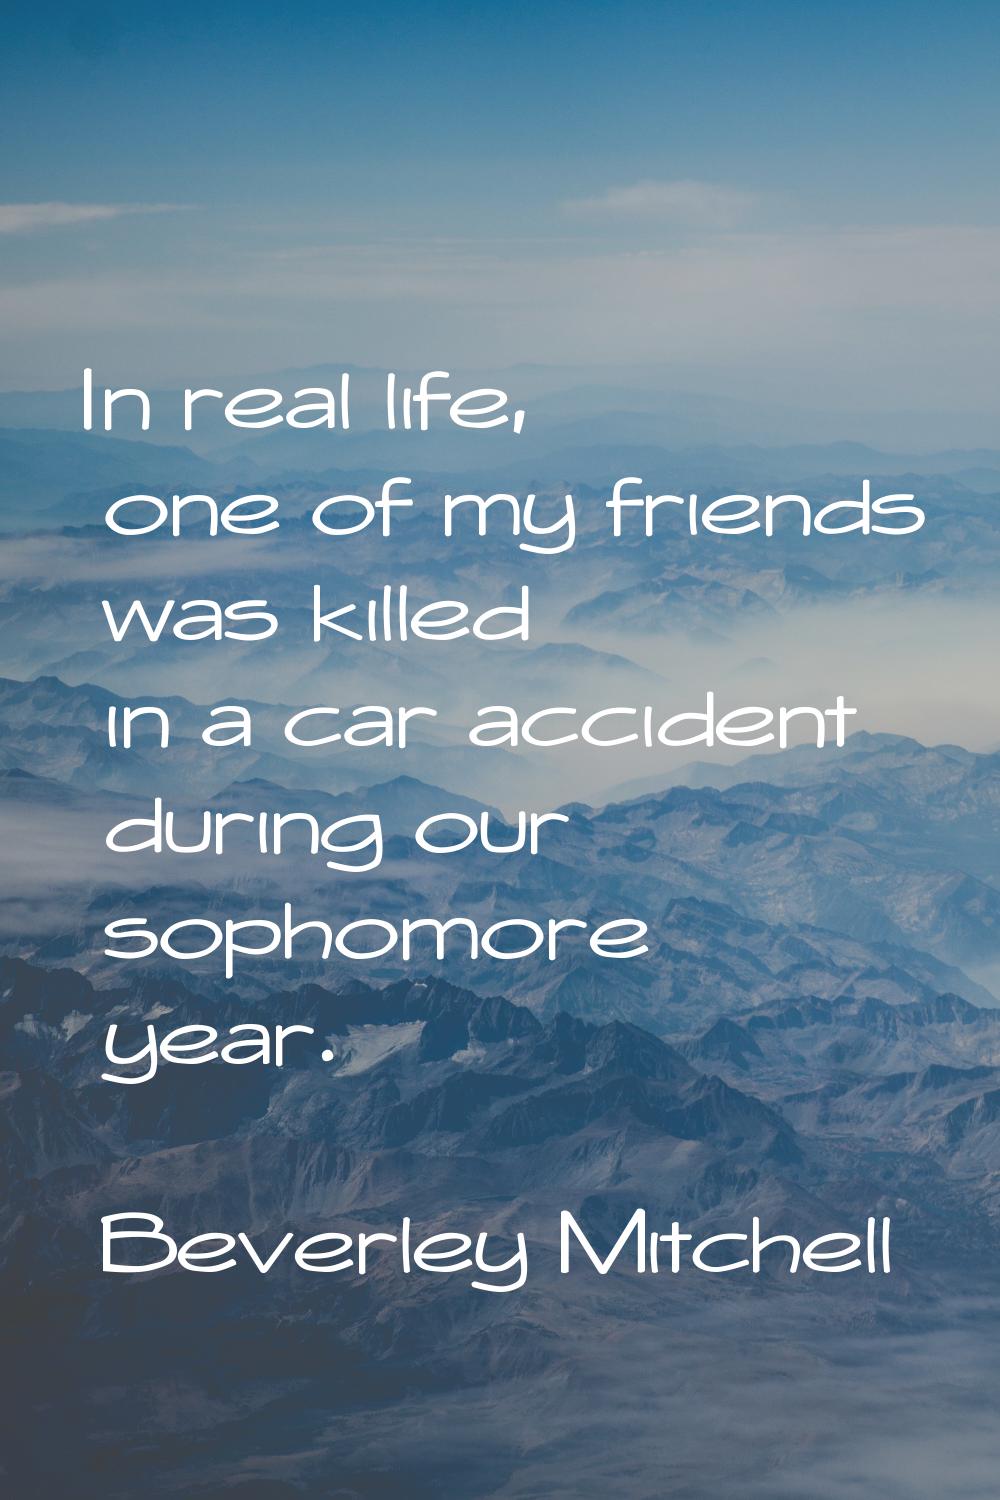 In real life, one of my friends was killed in a car accident during our sophomore year.